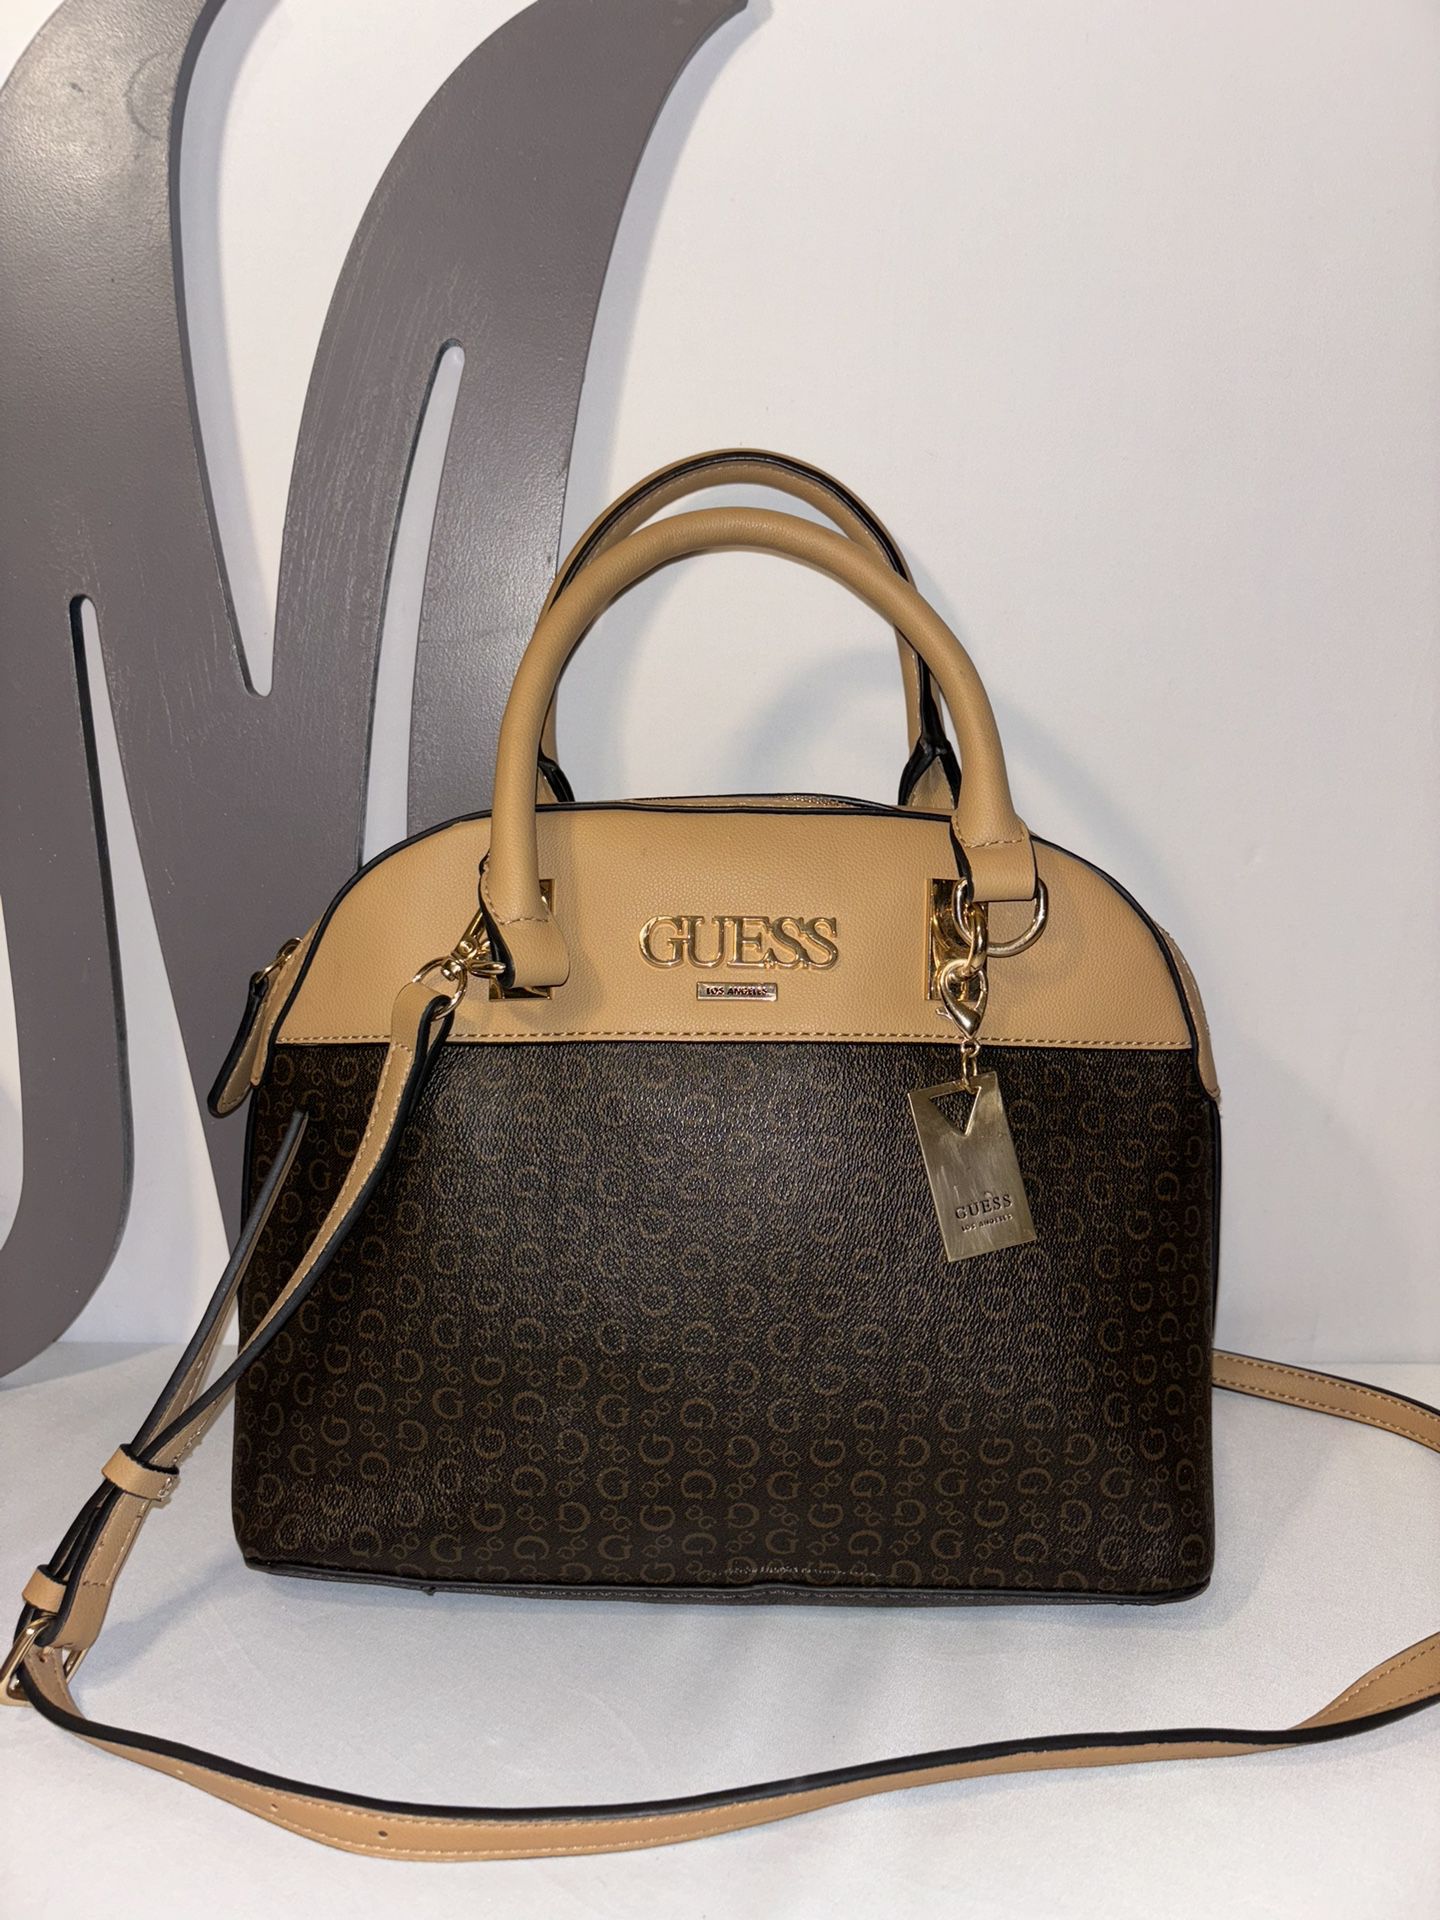 *GUESS* Two-Tone Leather Dome Satchel W/ Crossbody Strap.